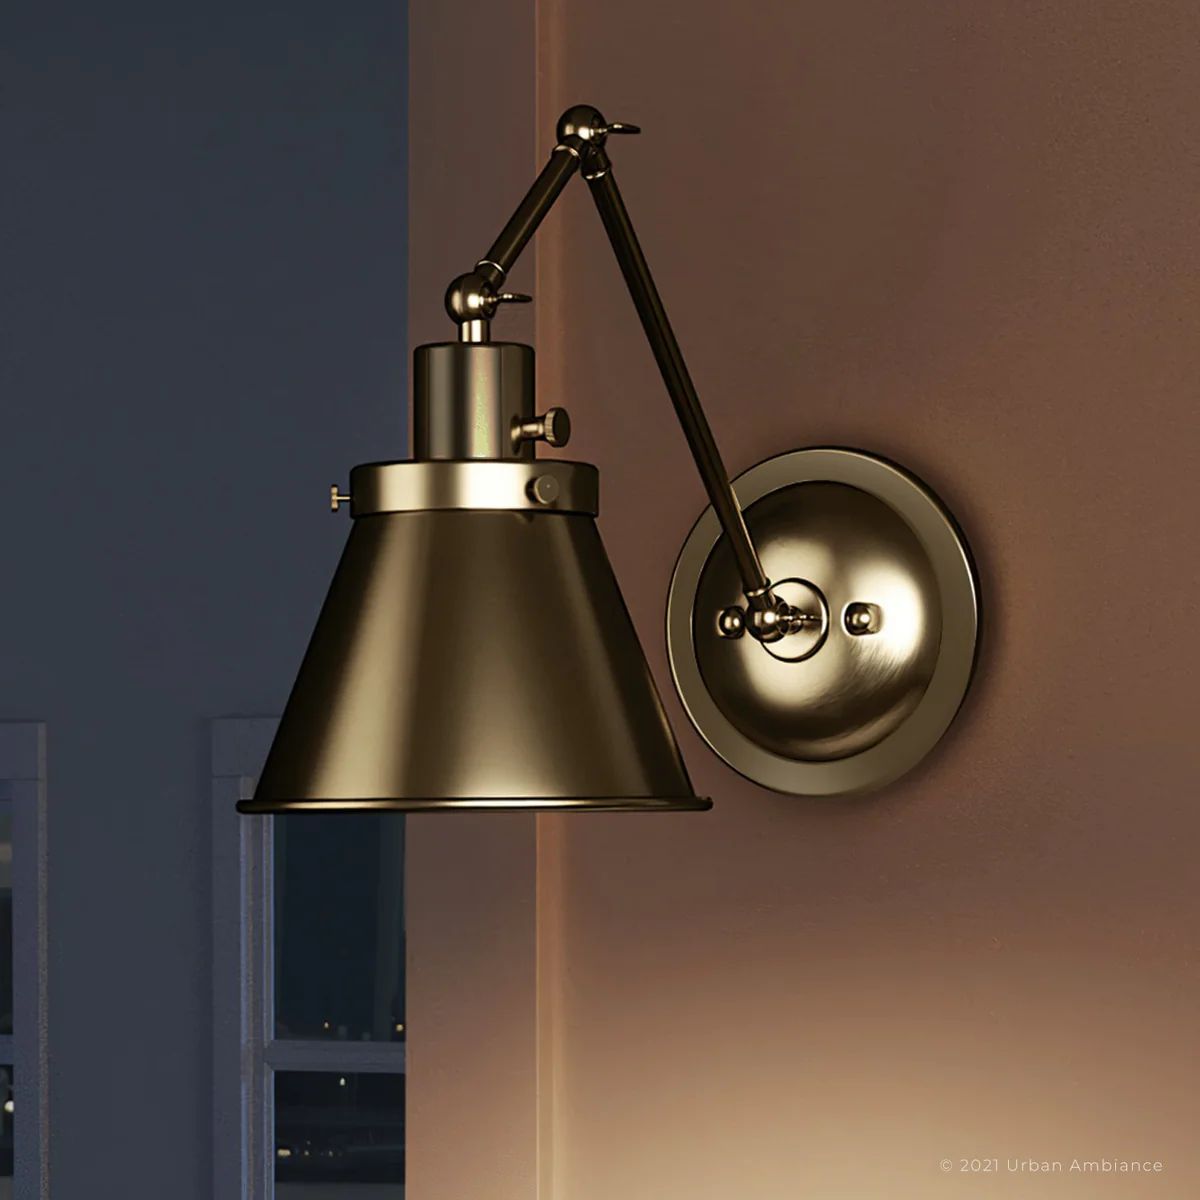 UHP3322 Traditional Wall Light, 14.375"H x 8.25"W, Olde Brass Finish, Pawtucket Collection | Urban Ambiance, Inc.